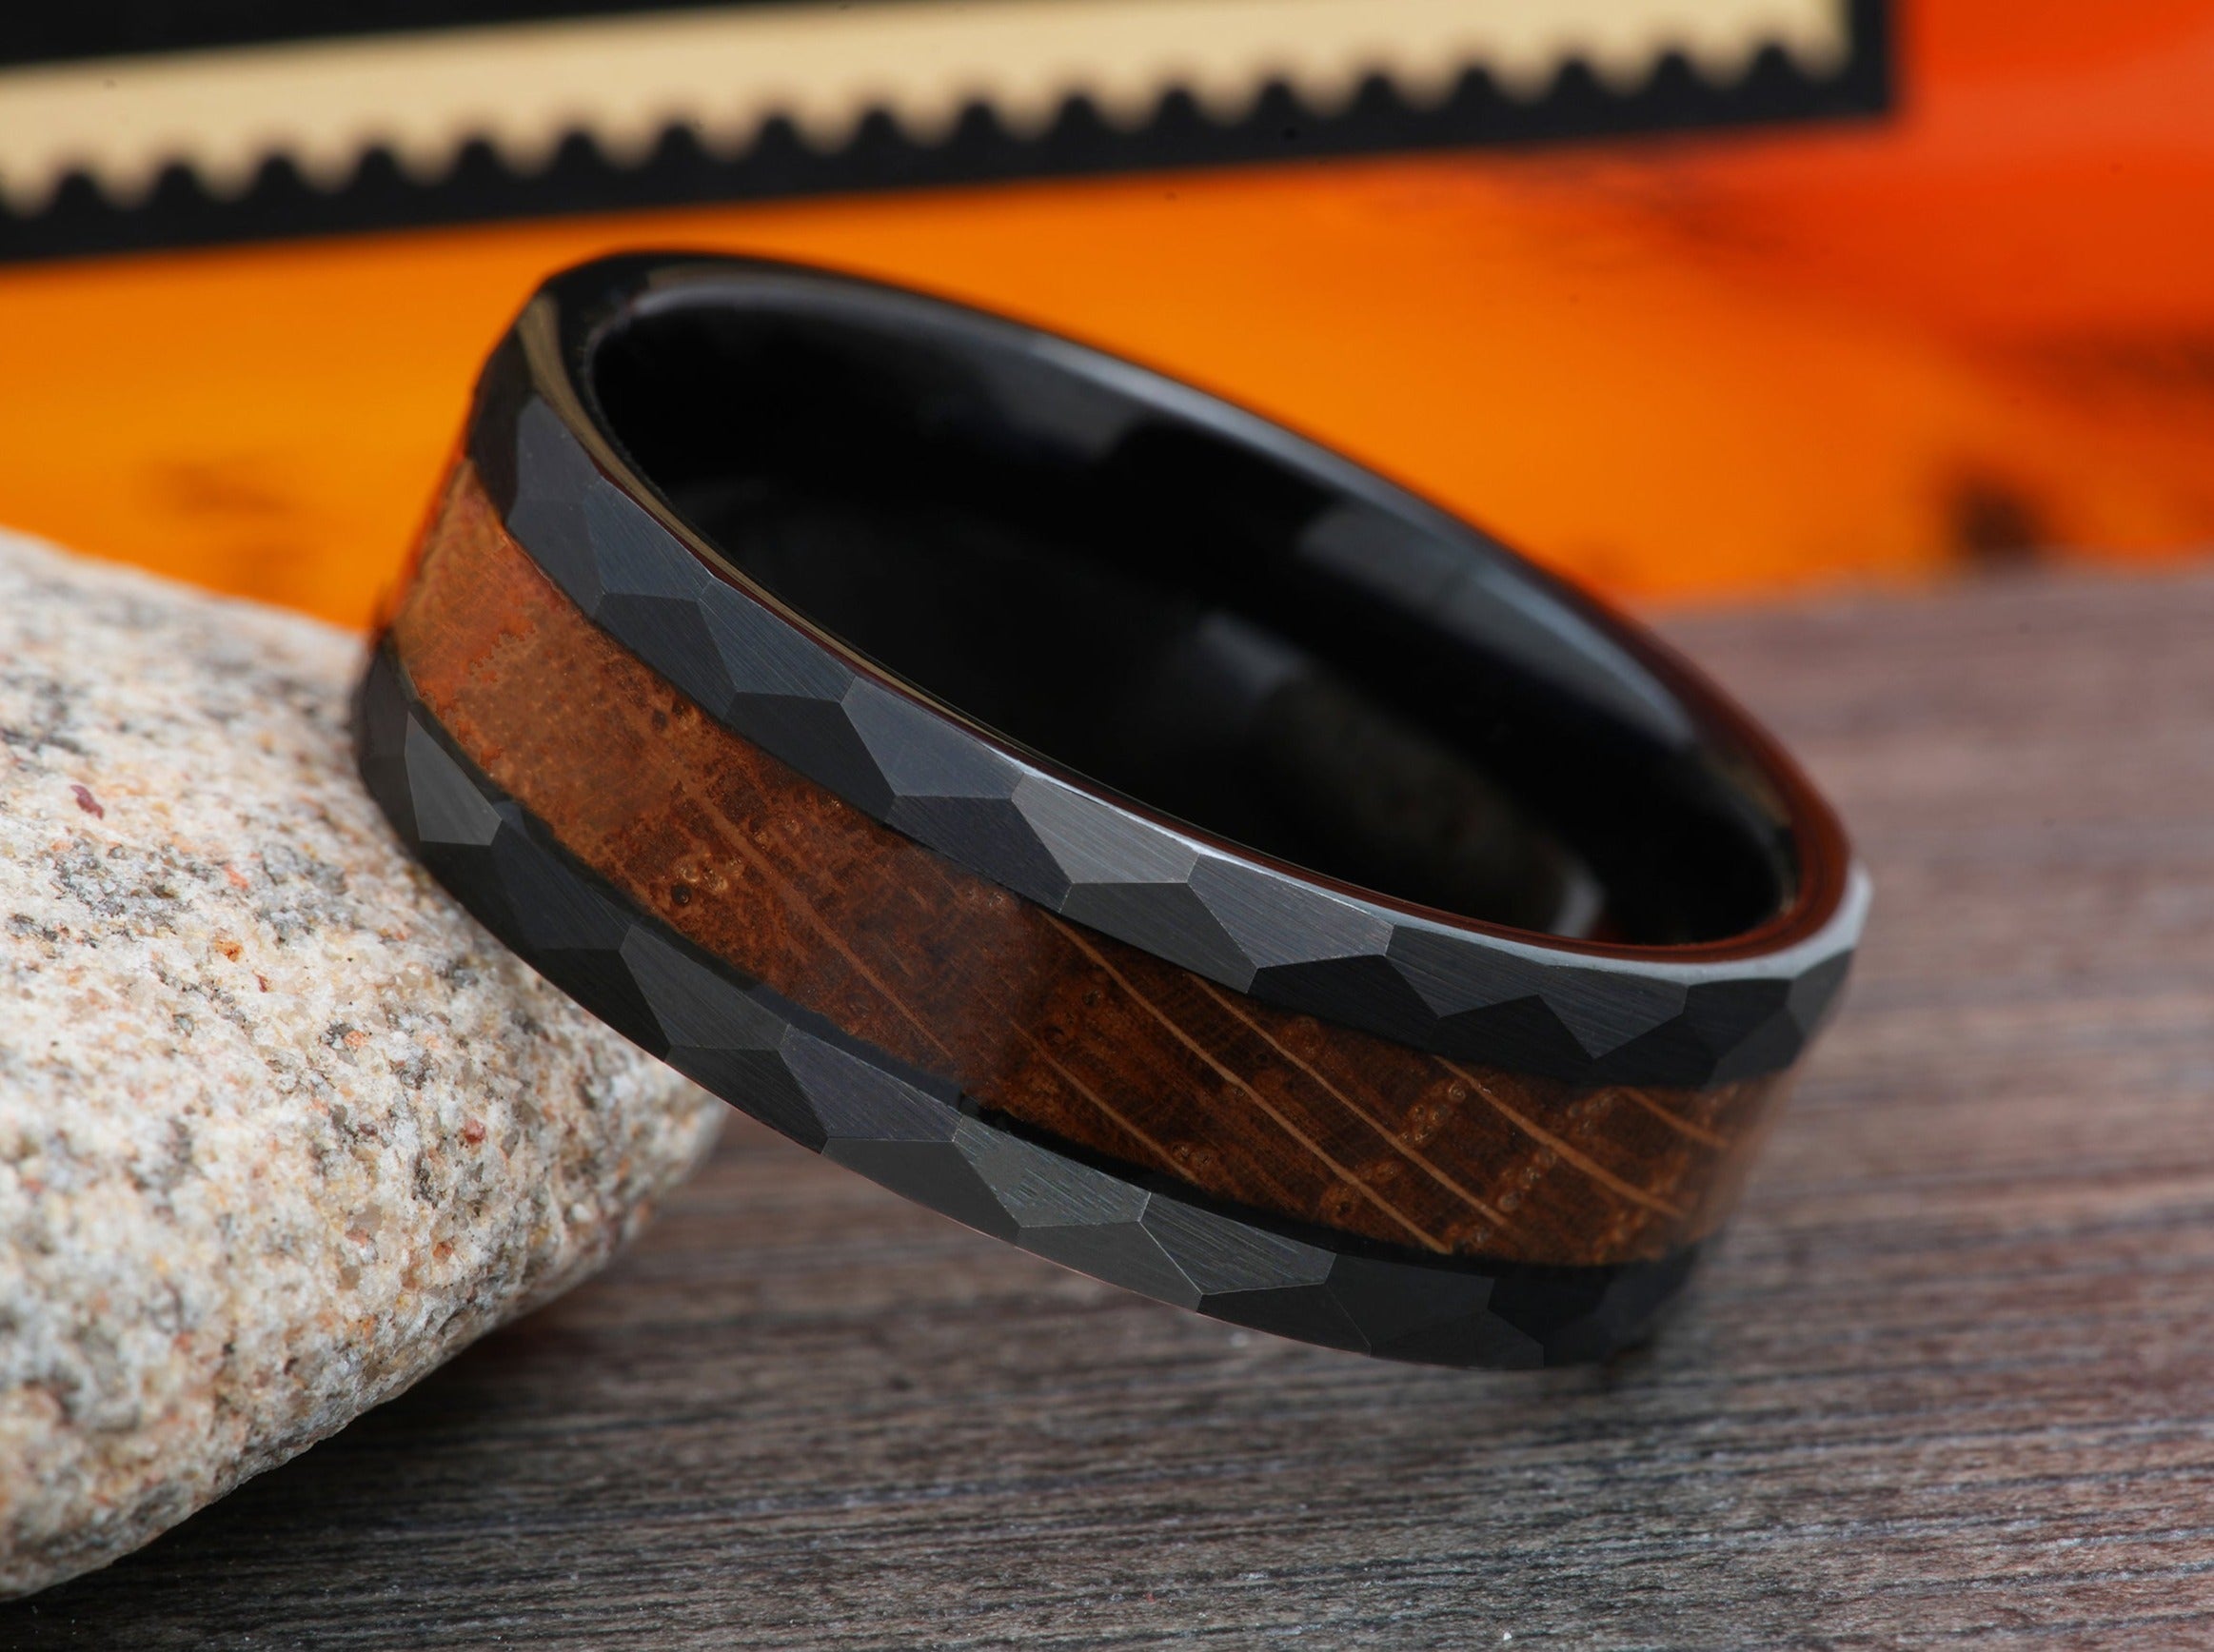 The Apollo | Black Tungsten Wedding Band with Tennessee Whiskey Barrel Wood Inlay